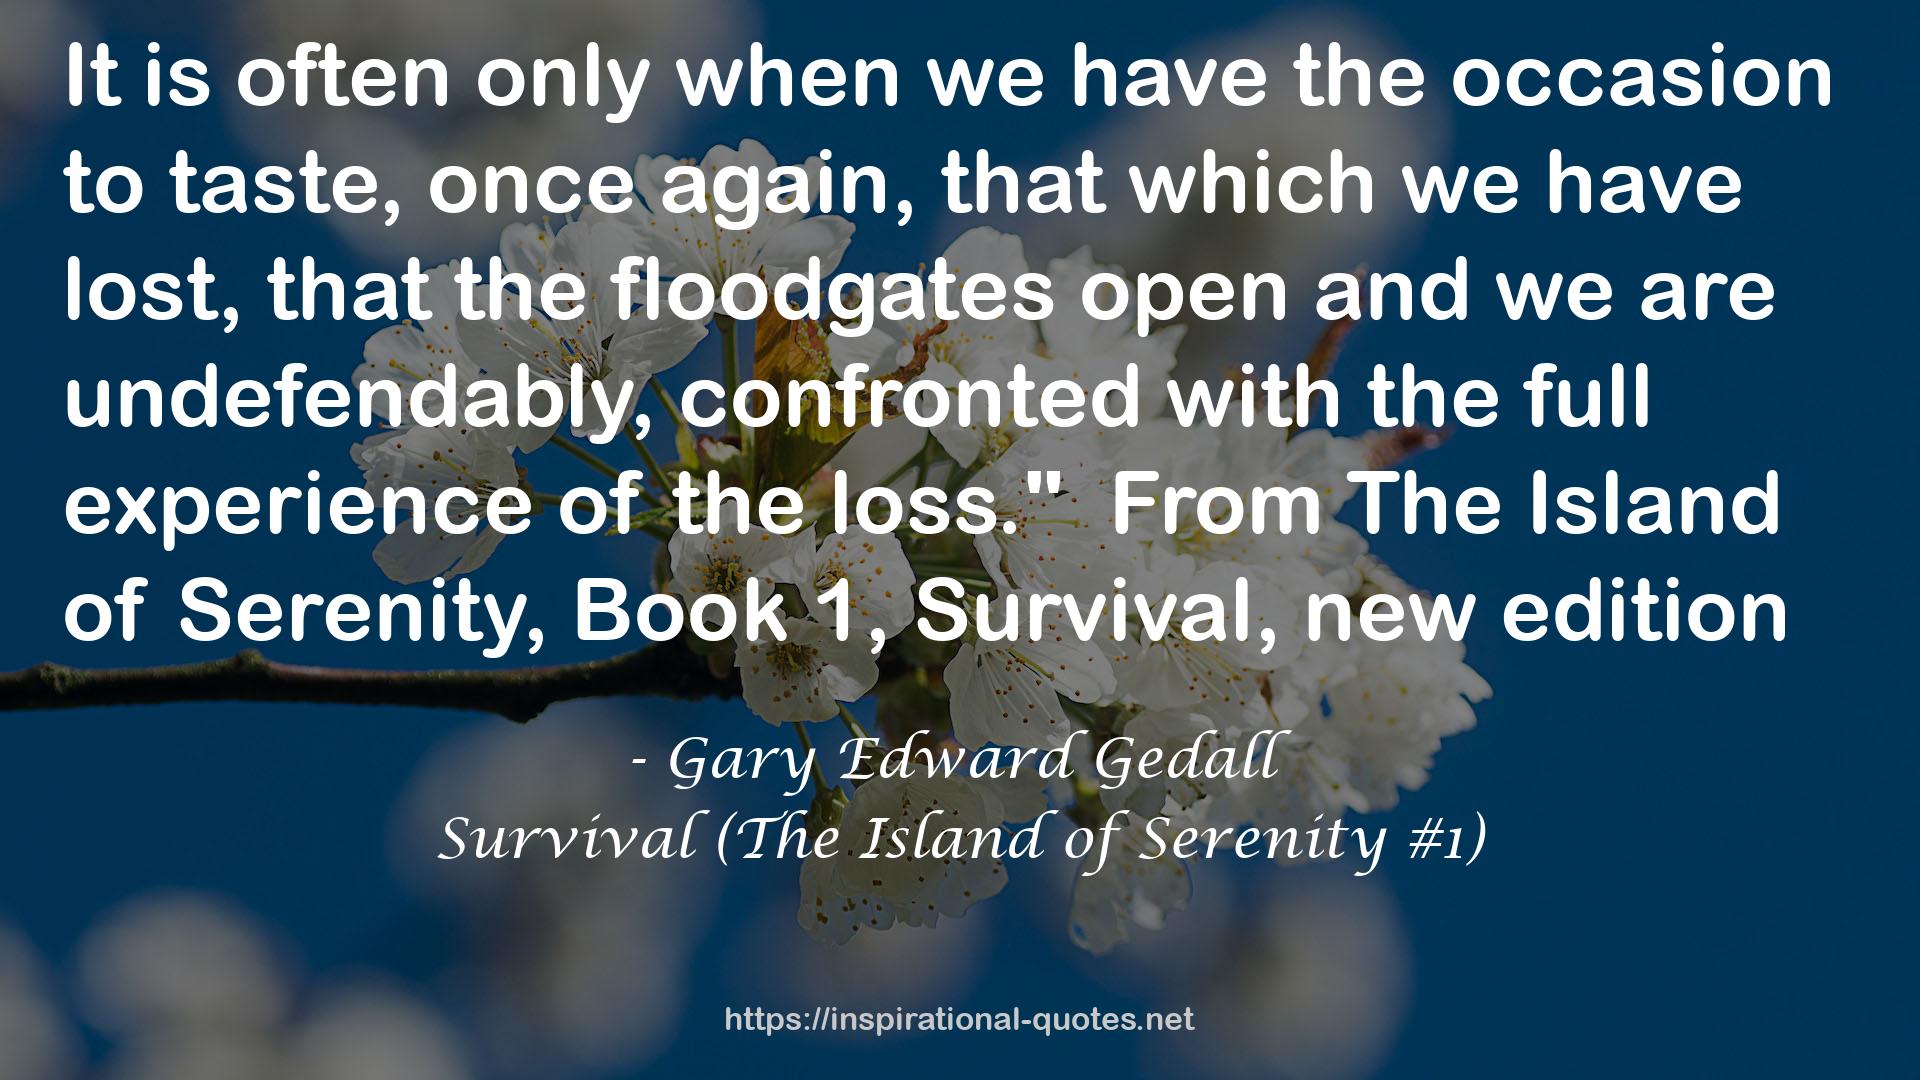 Survival (The Island of Serenity #1) QUOTES